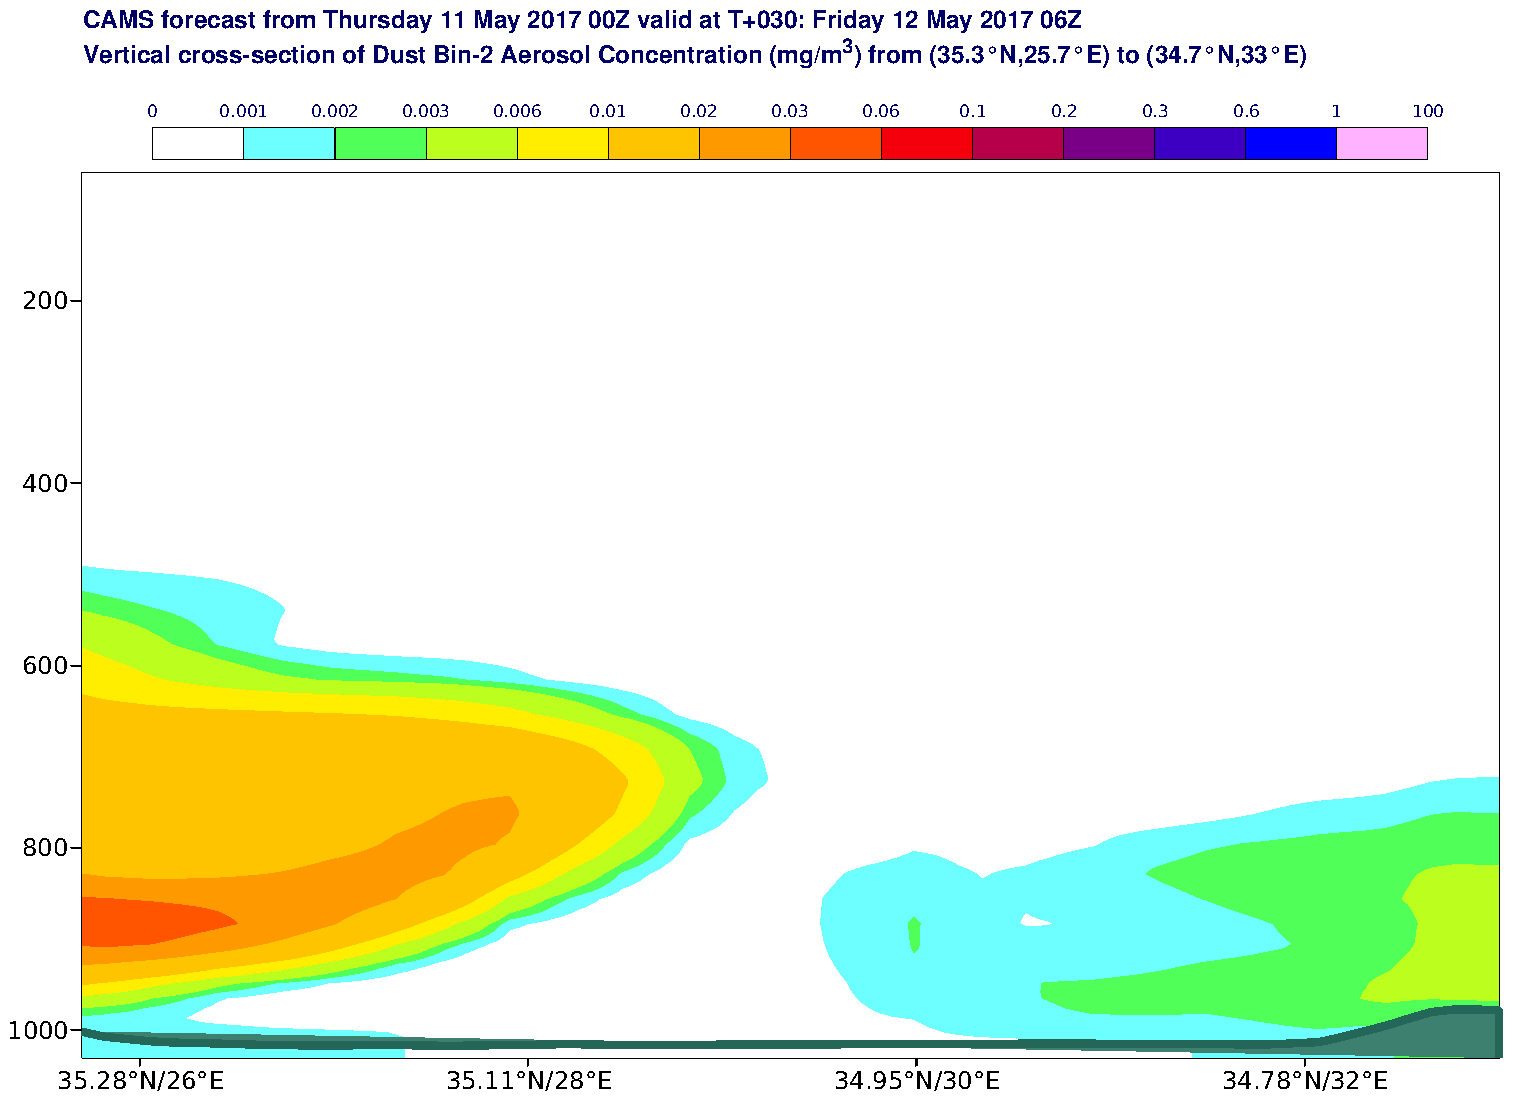 Vertical cross-section of Dust Bin-2 Aerosol Concentration (mg/m3) valid at T30 - 2017-05-12 06:00